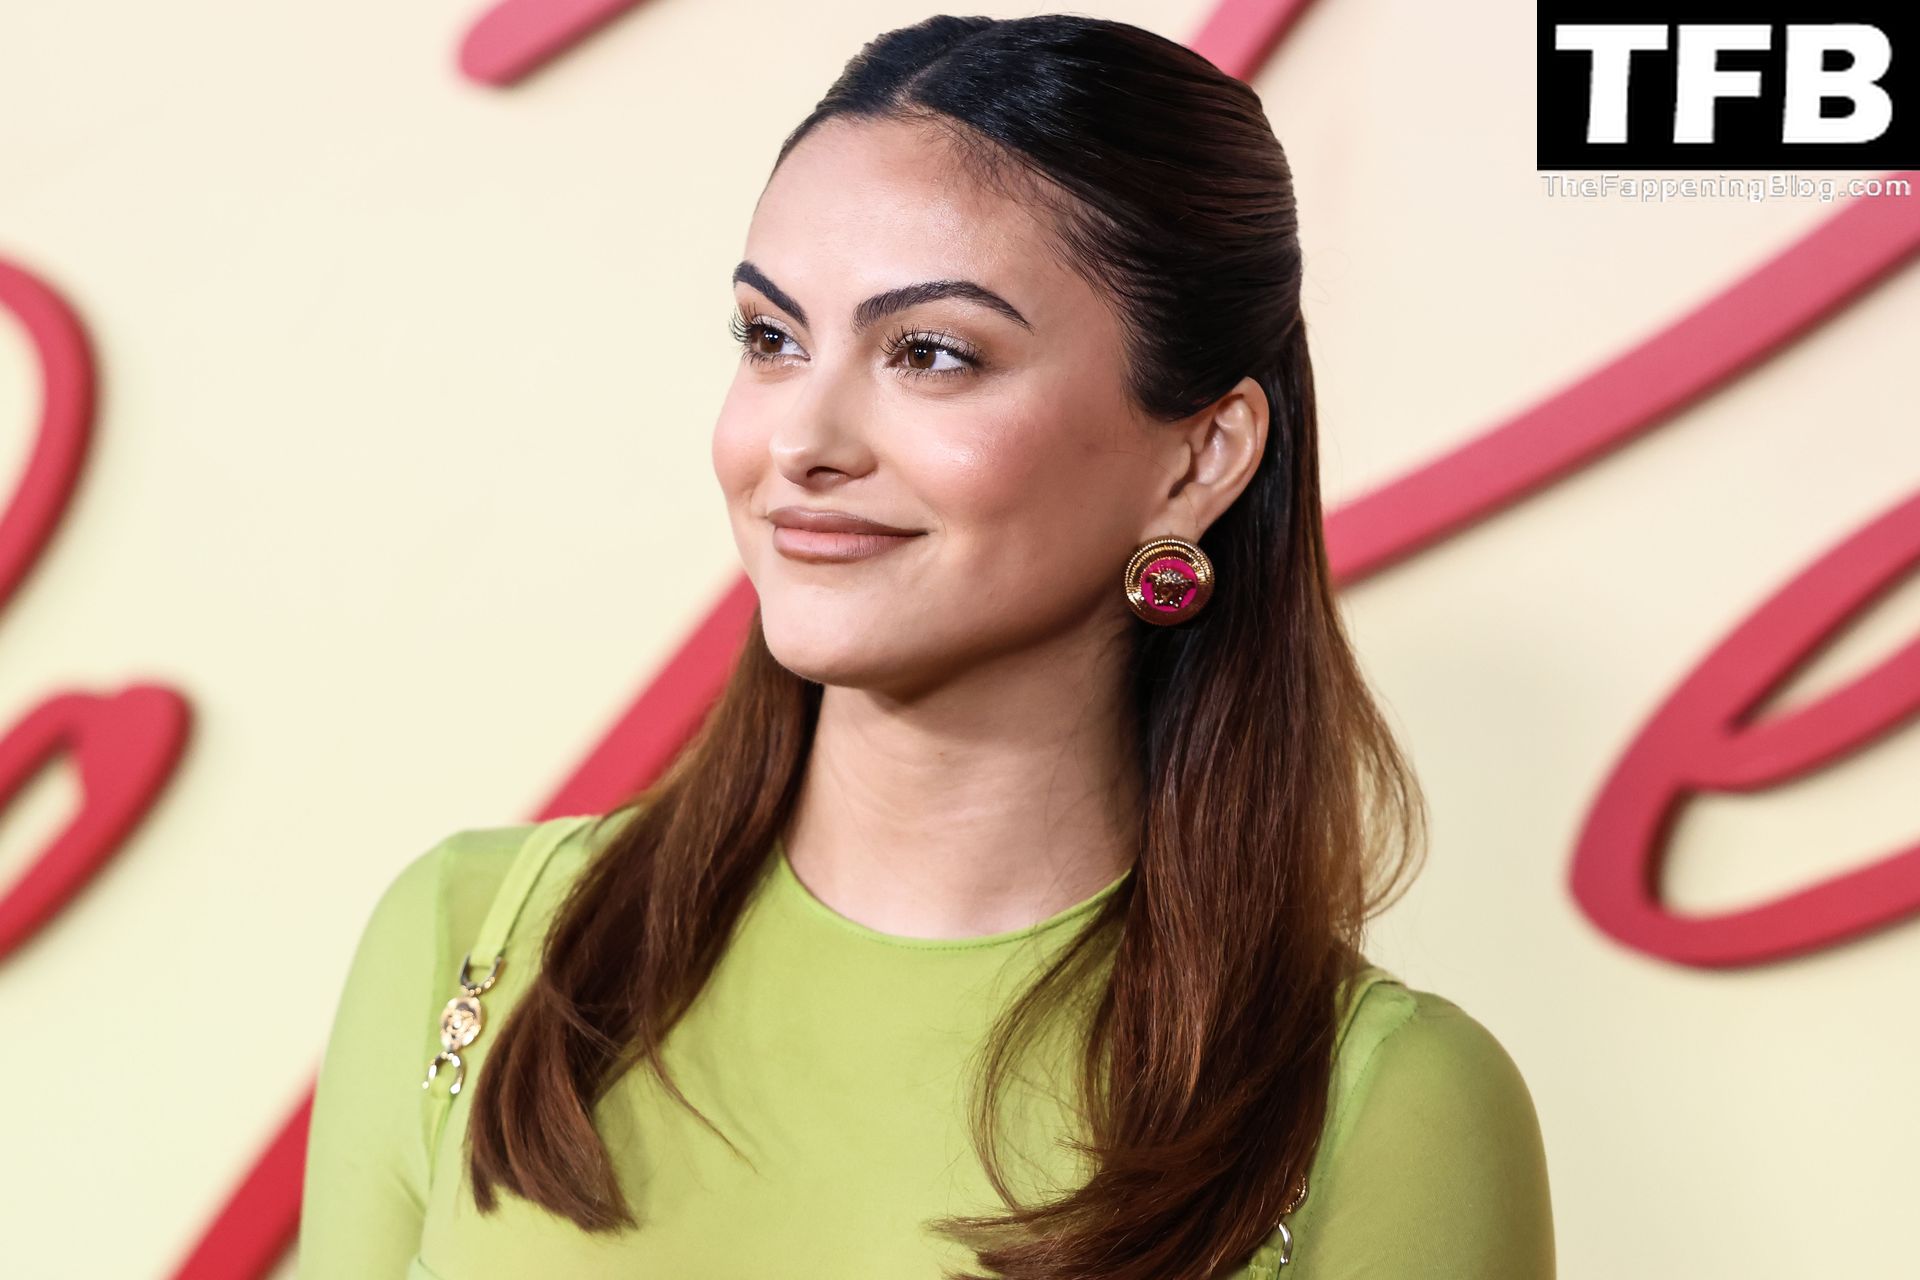 Camila-Mendes-Sexy-The-Fappening-Blog-115.jpg